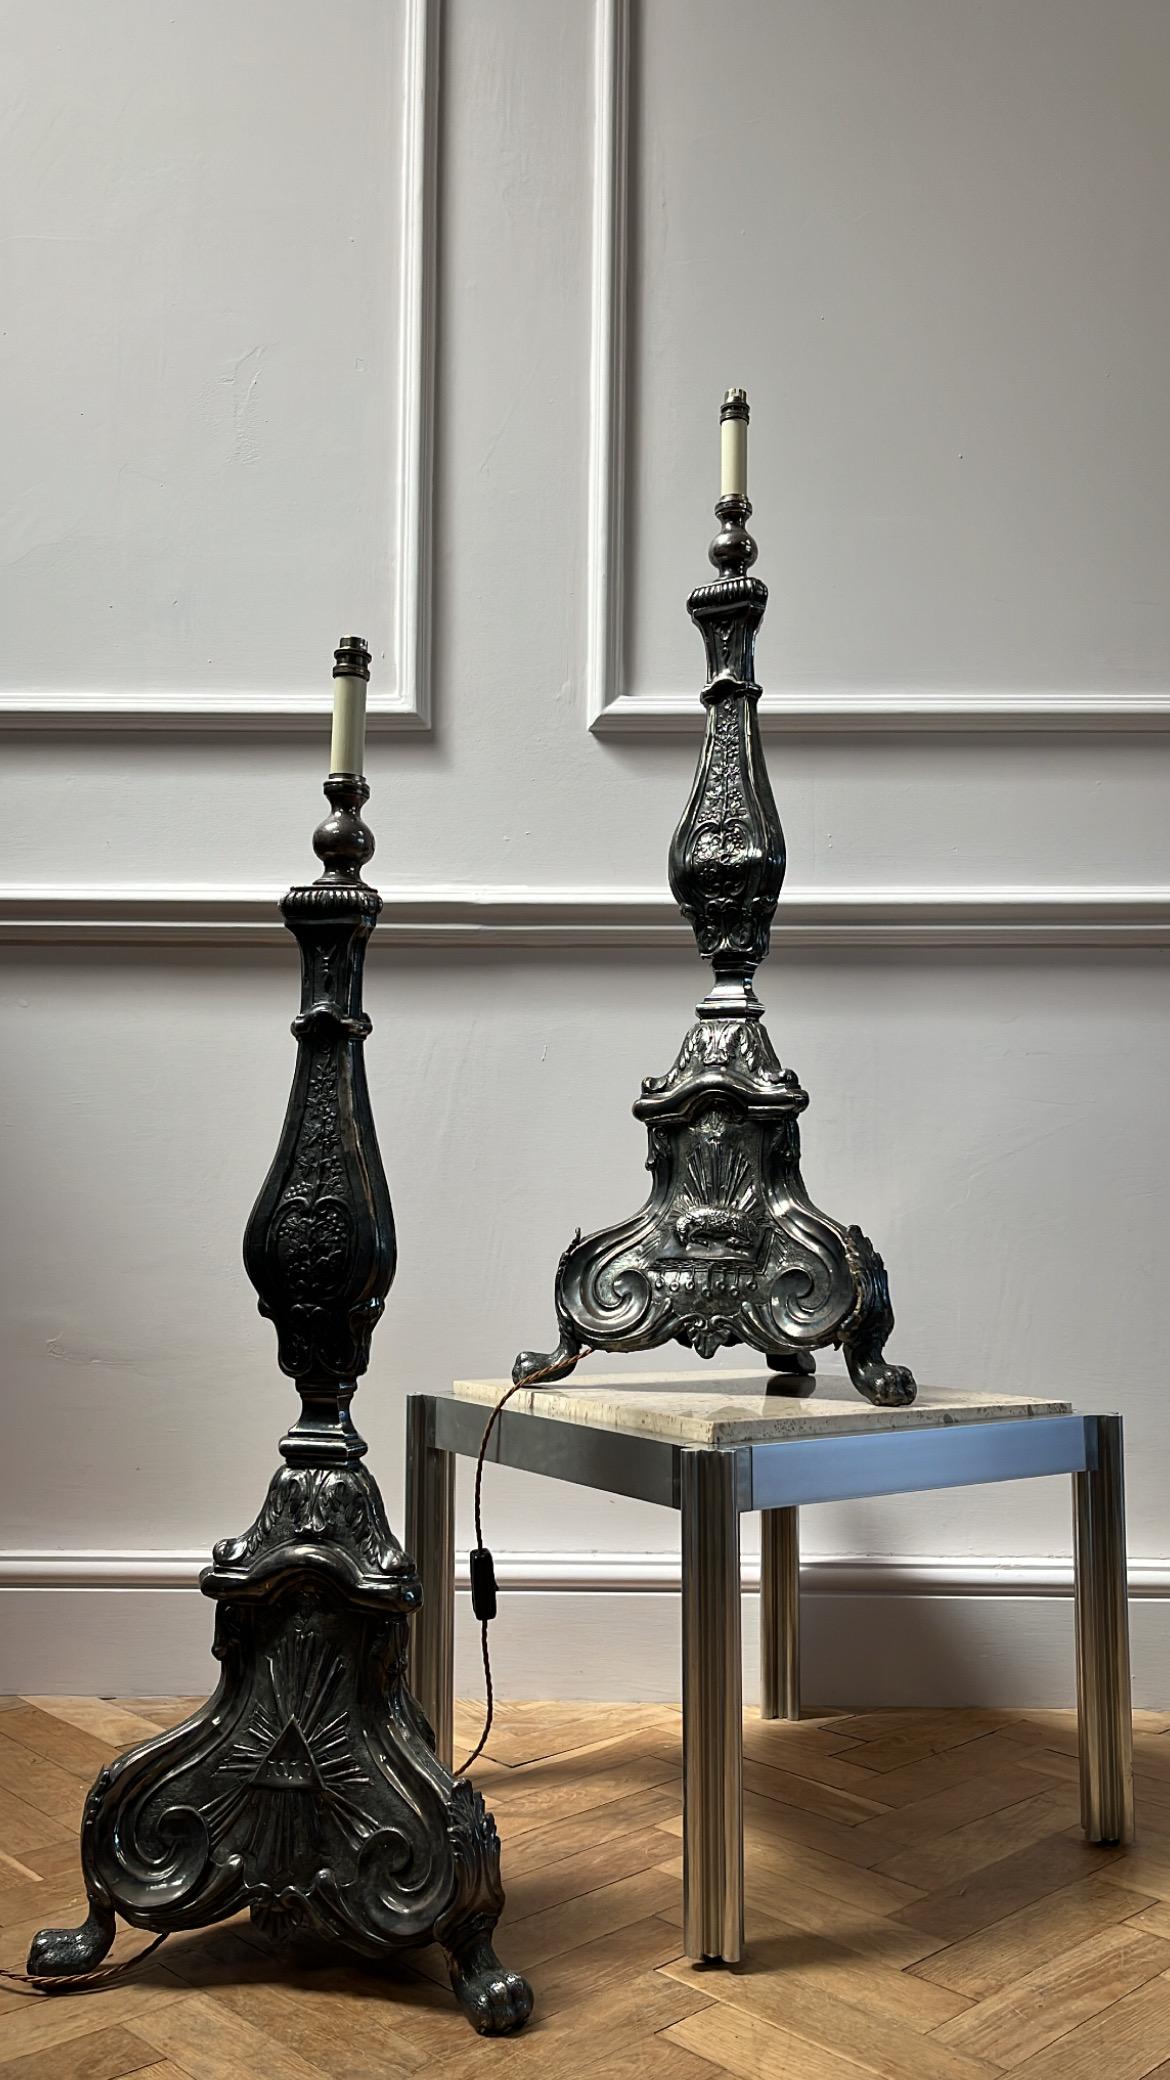 Portuguese Fine Pair of Nineteenth Century Repousse Candlesticks For Sale